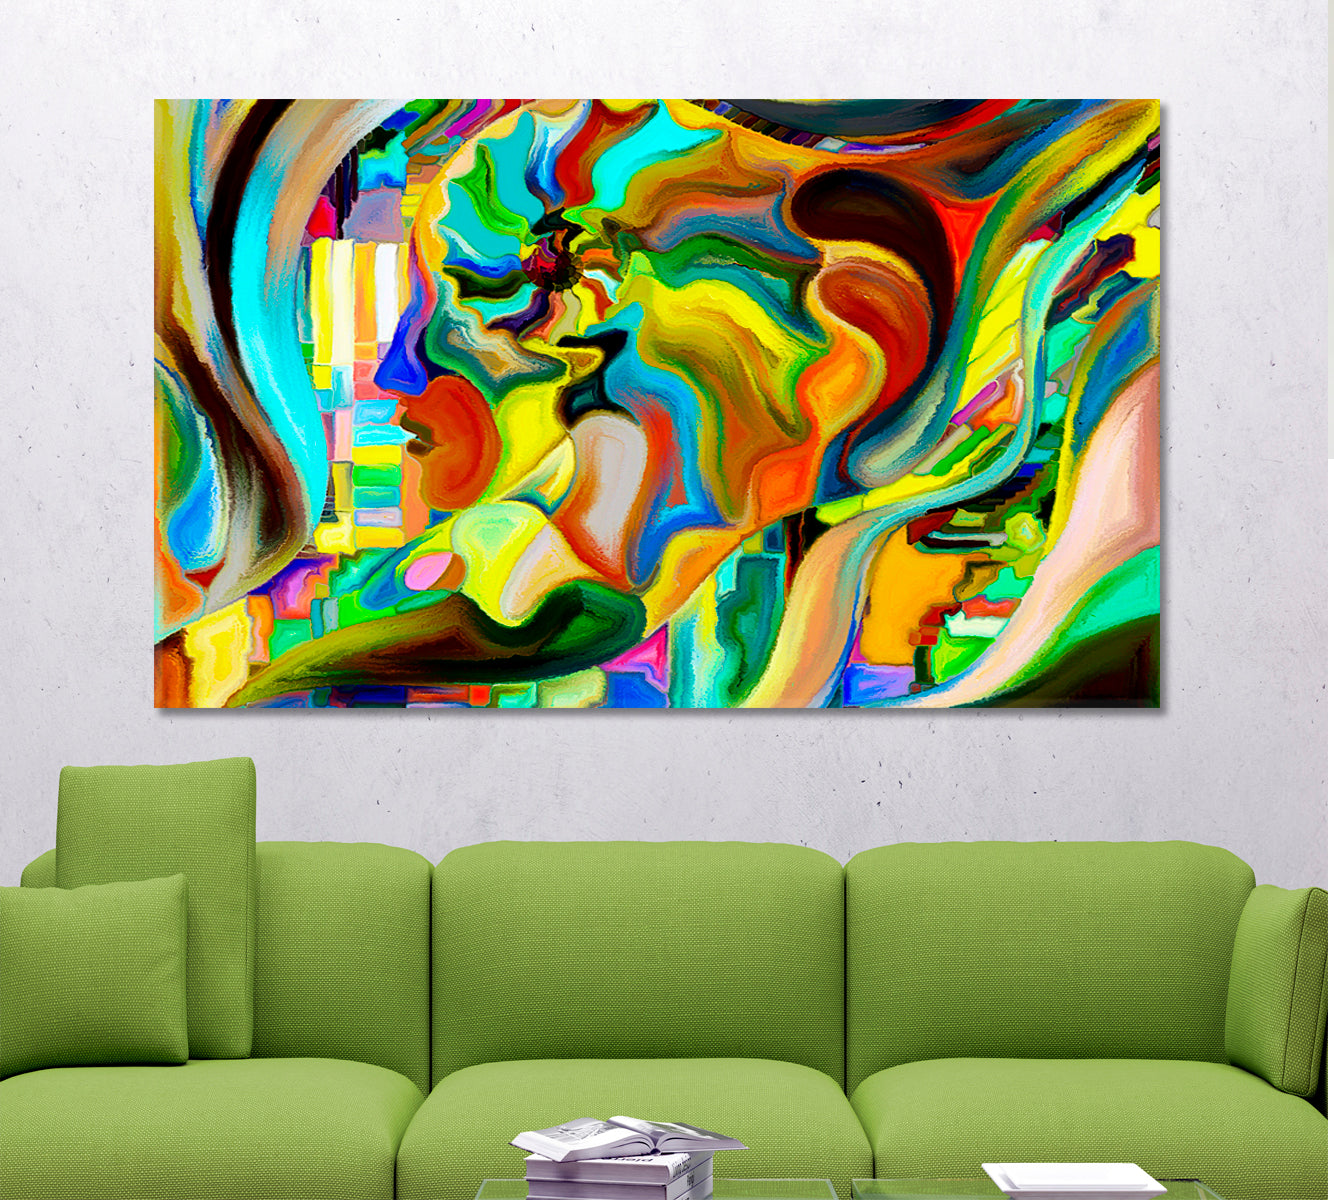 Personification of Nature in Paints Abstract Art Print Artesty 1 panel 24" x 16" 